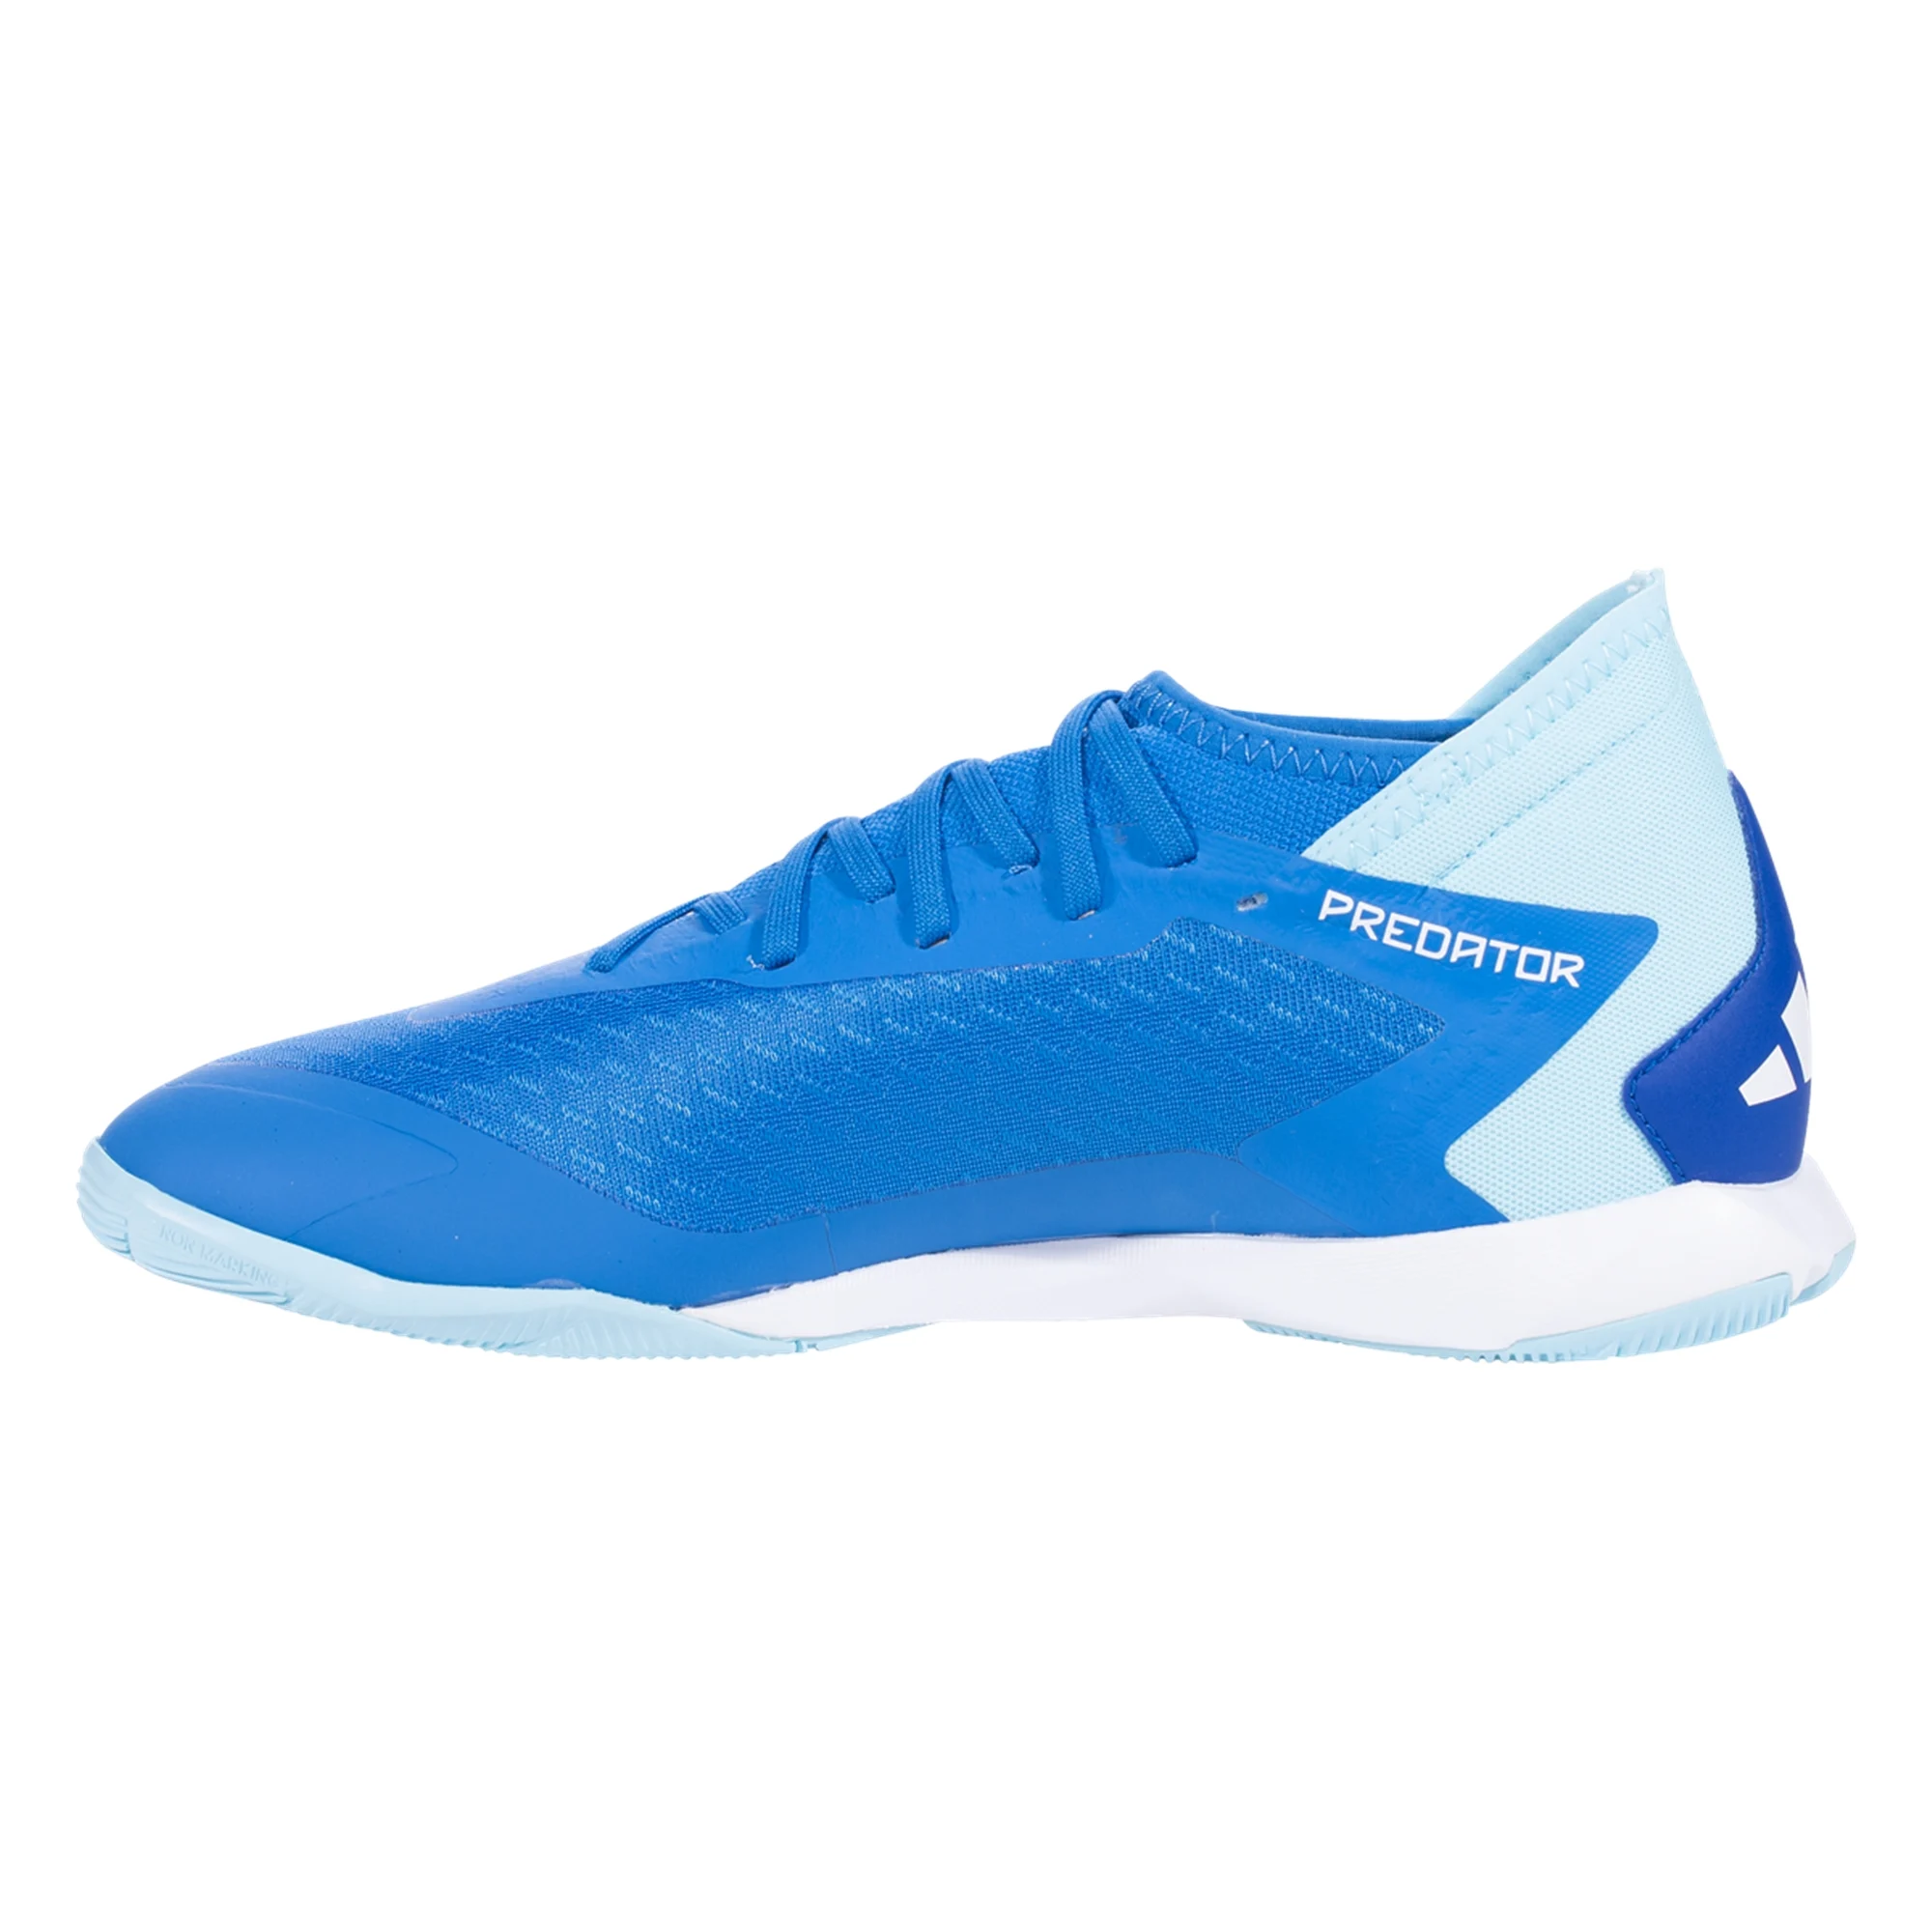 Predator Accuracy.3 - Soccer Shoes Blu Wearhouse (Bright Royal/Bliss Indoor Soccer adidas